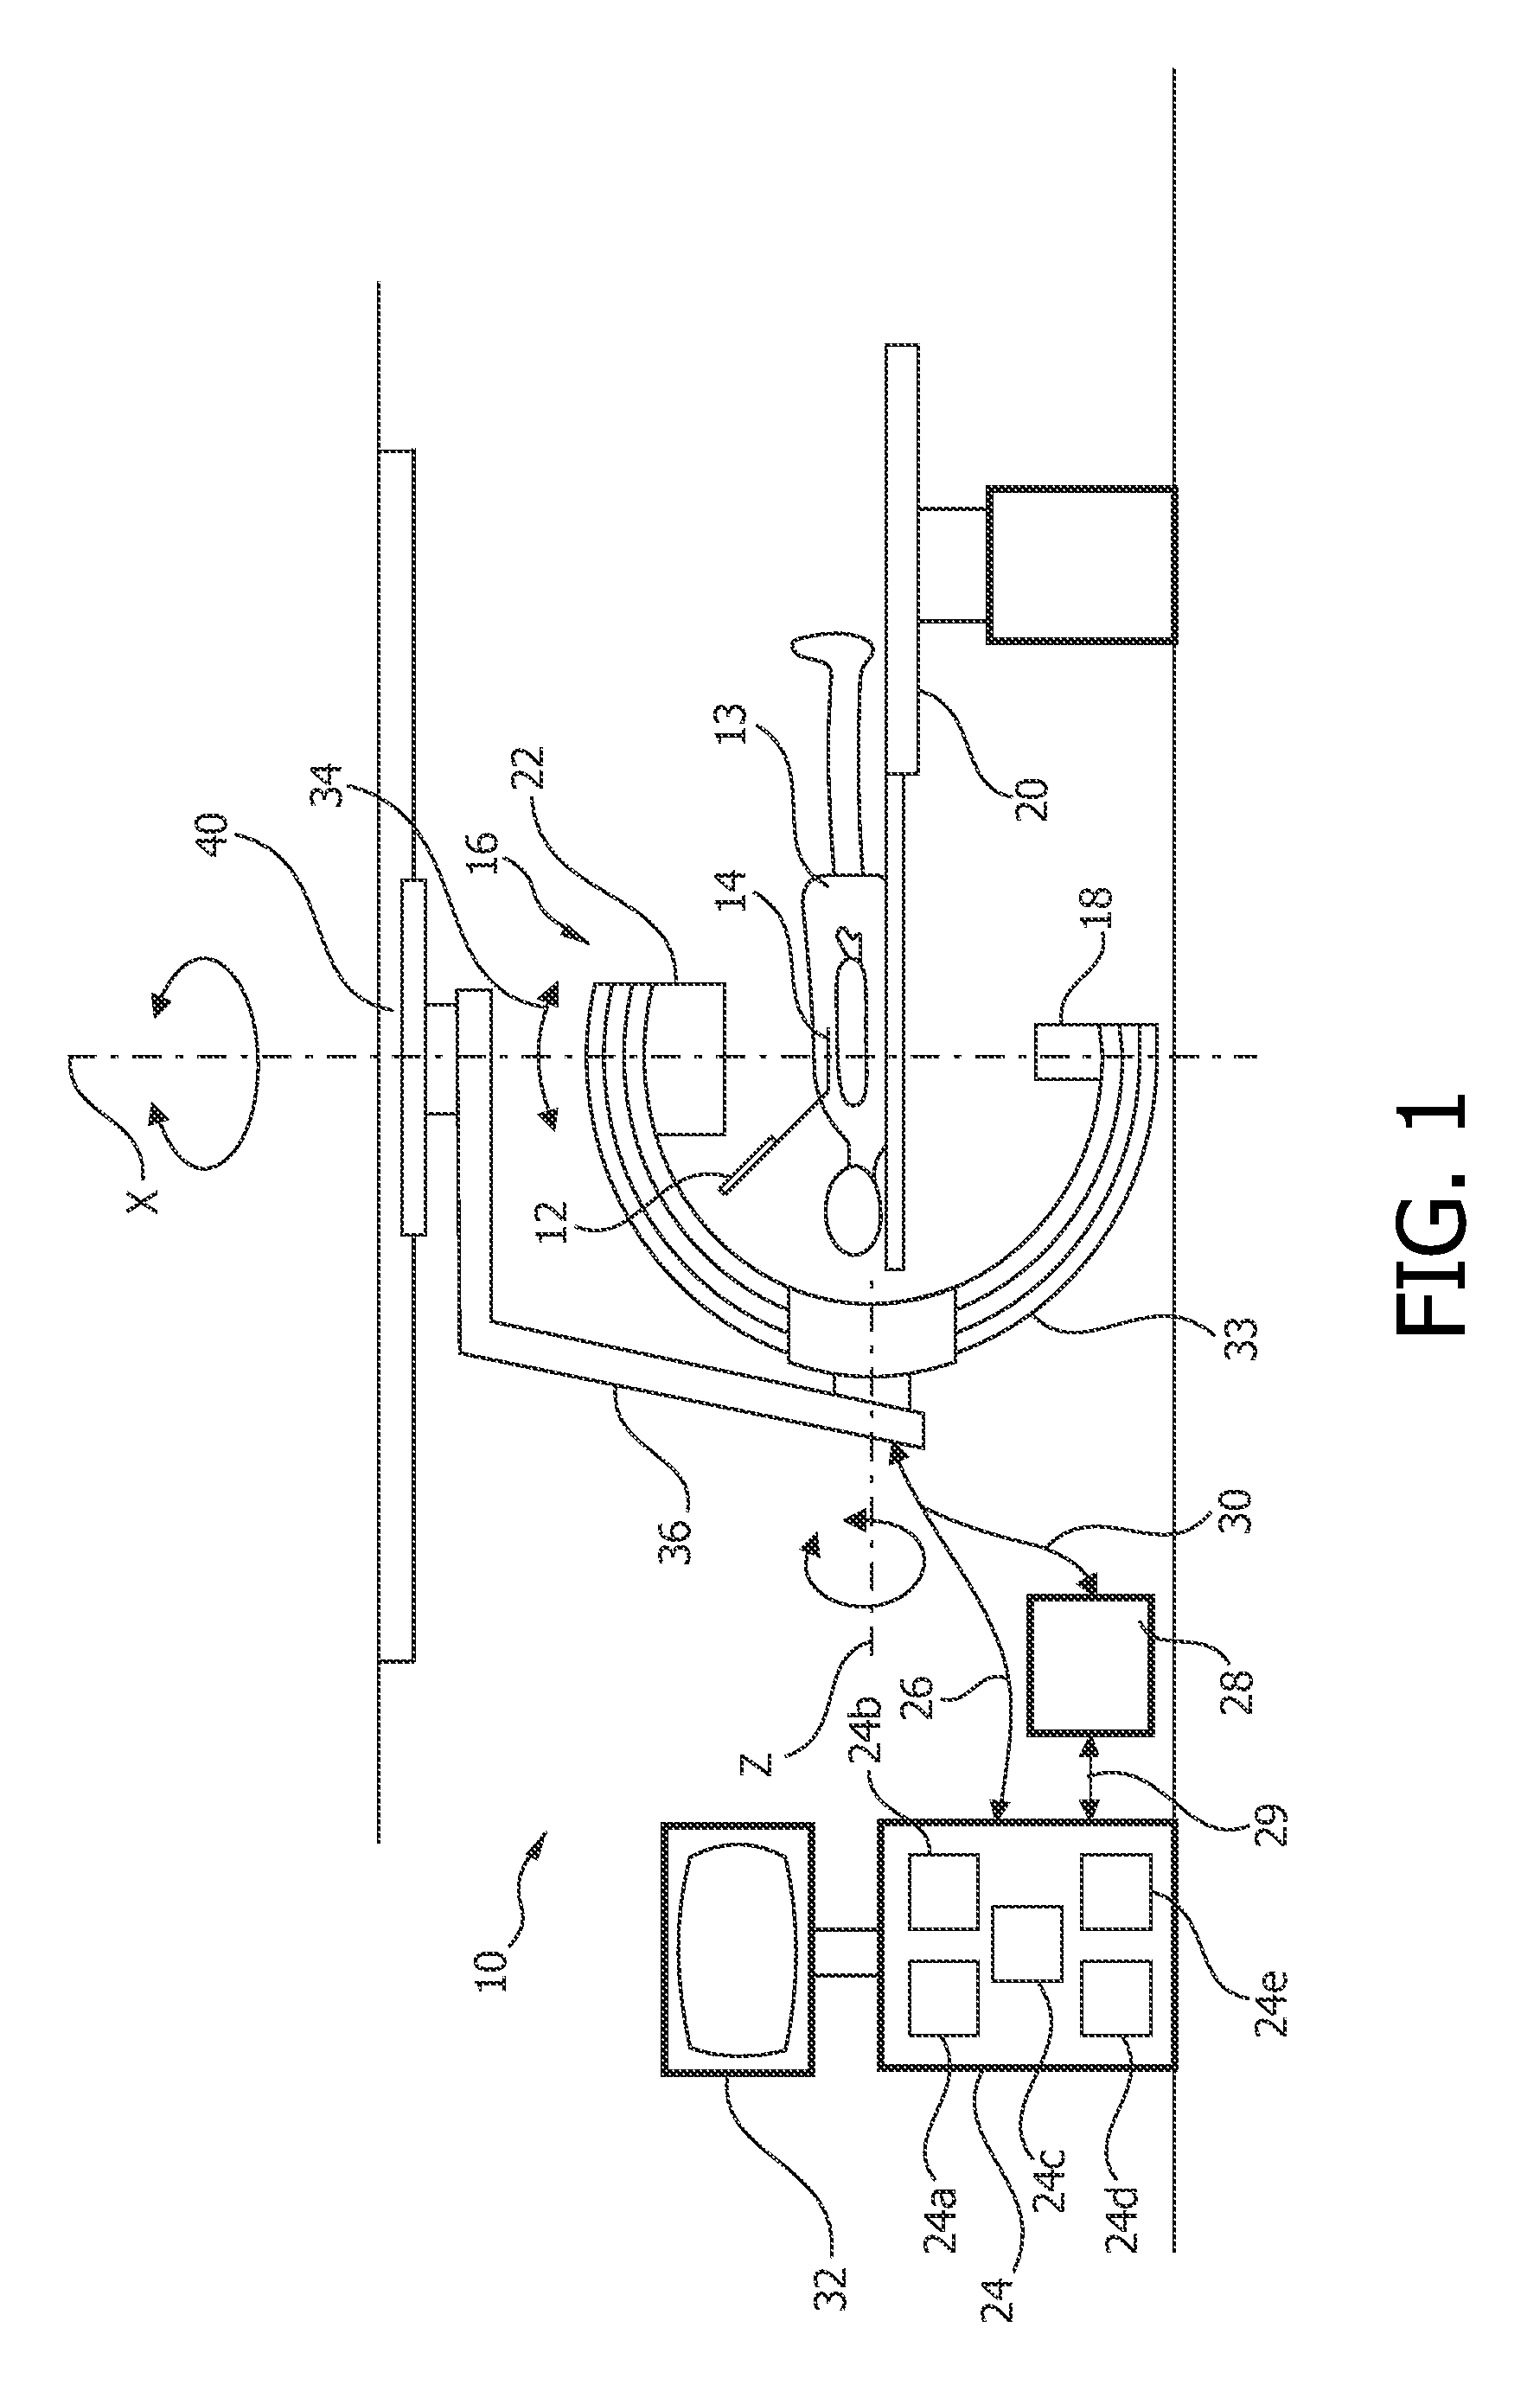 System and method for producing an image of a physical object